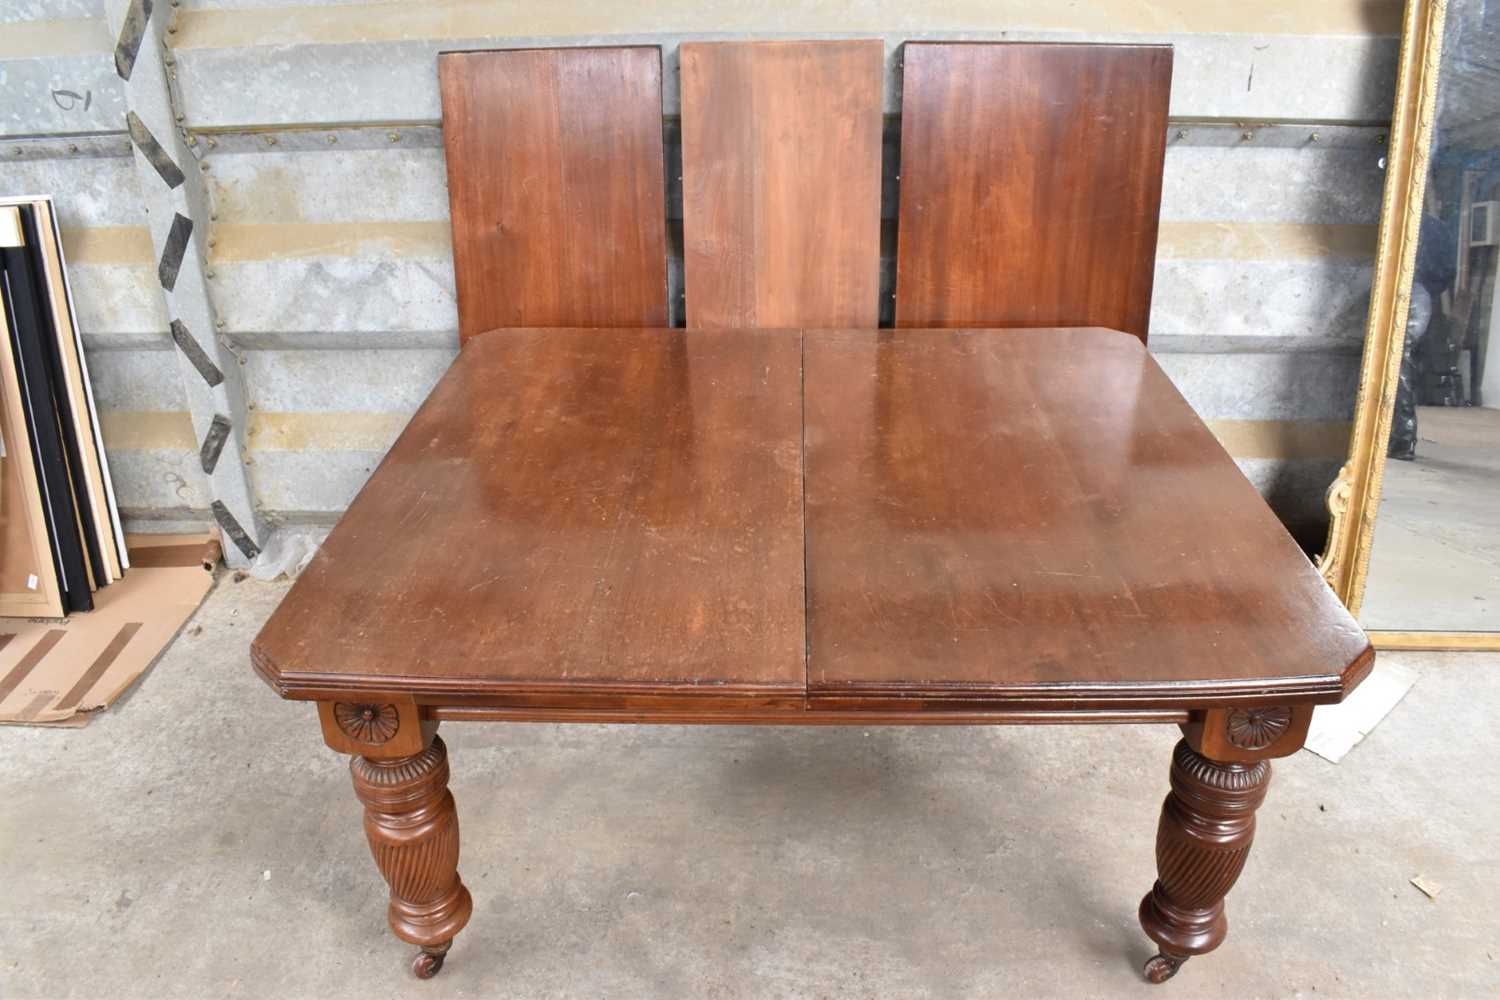 Very large Edwardian mahogany extending dining table, with three additional leaves